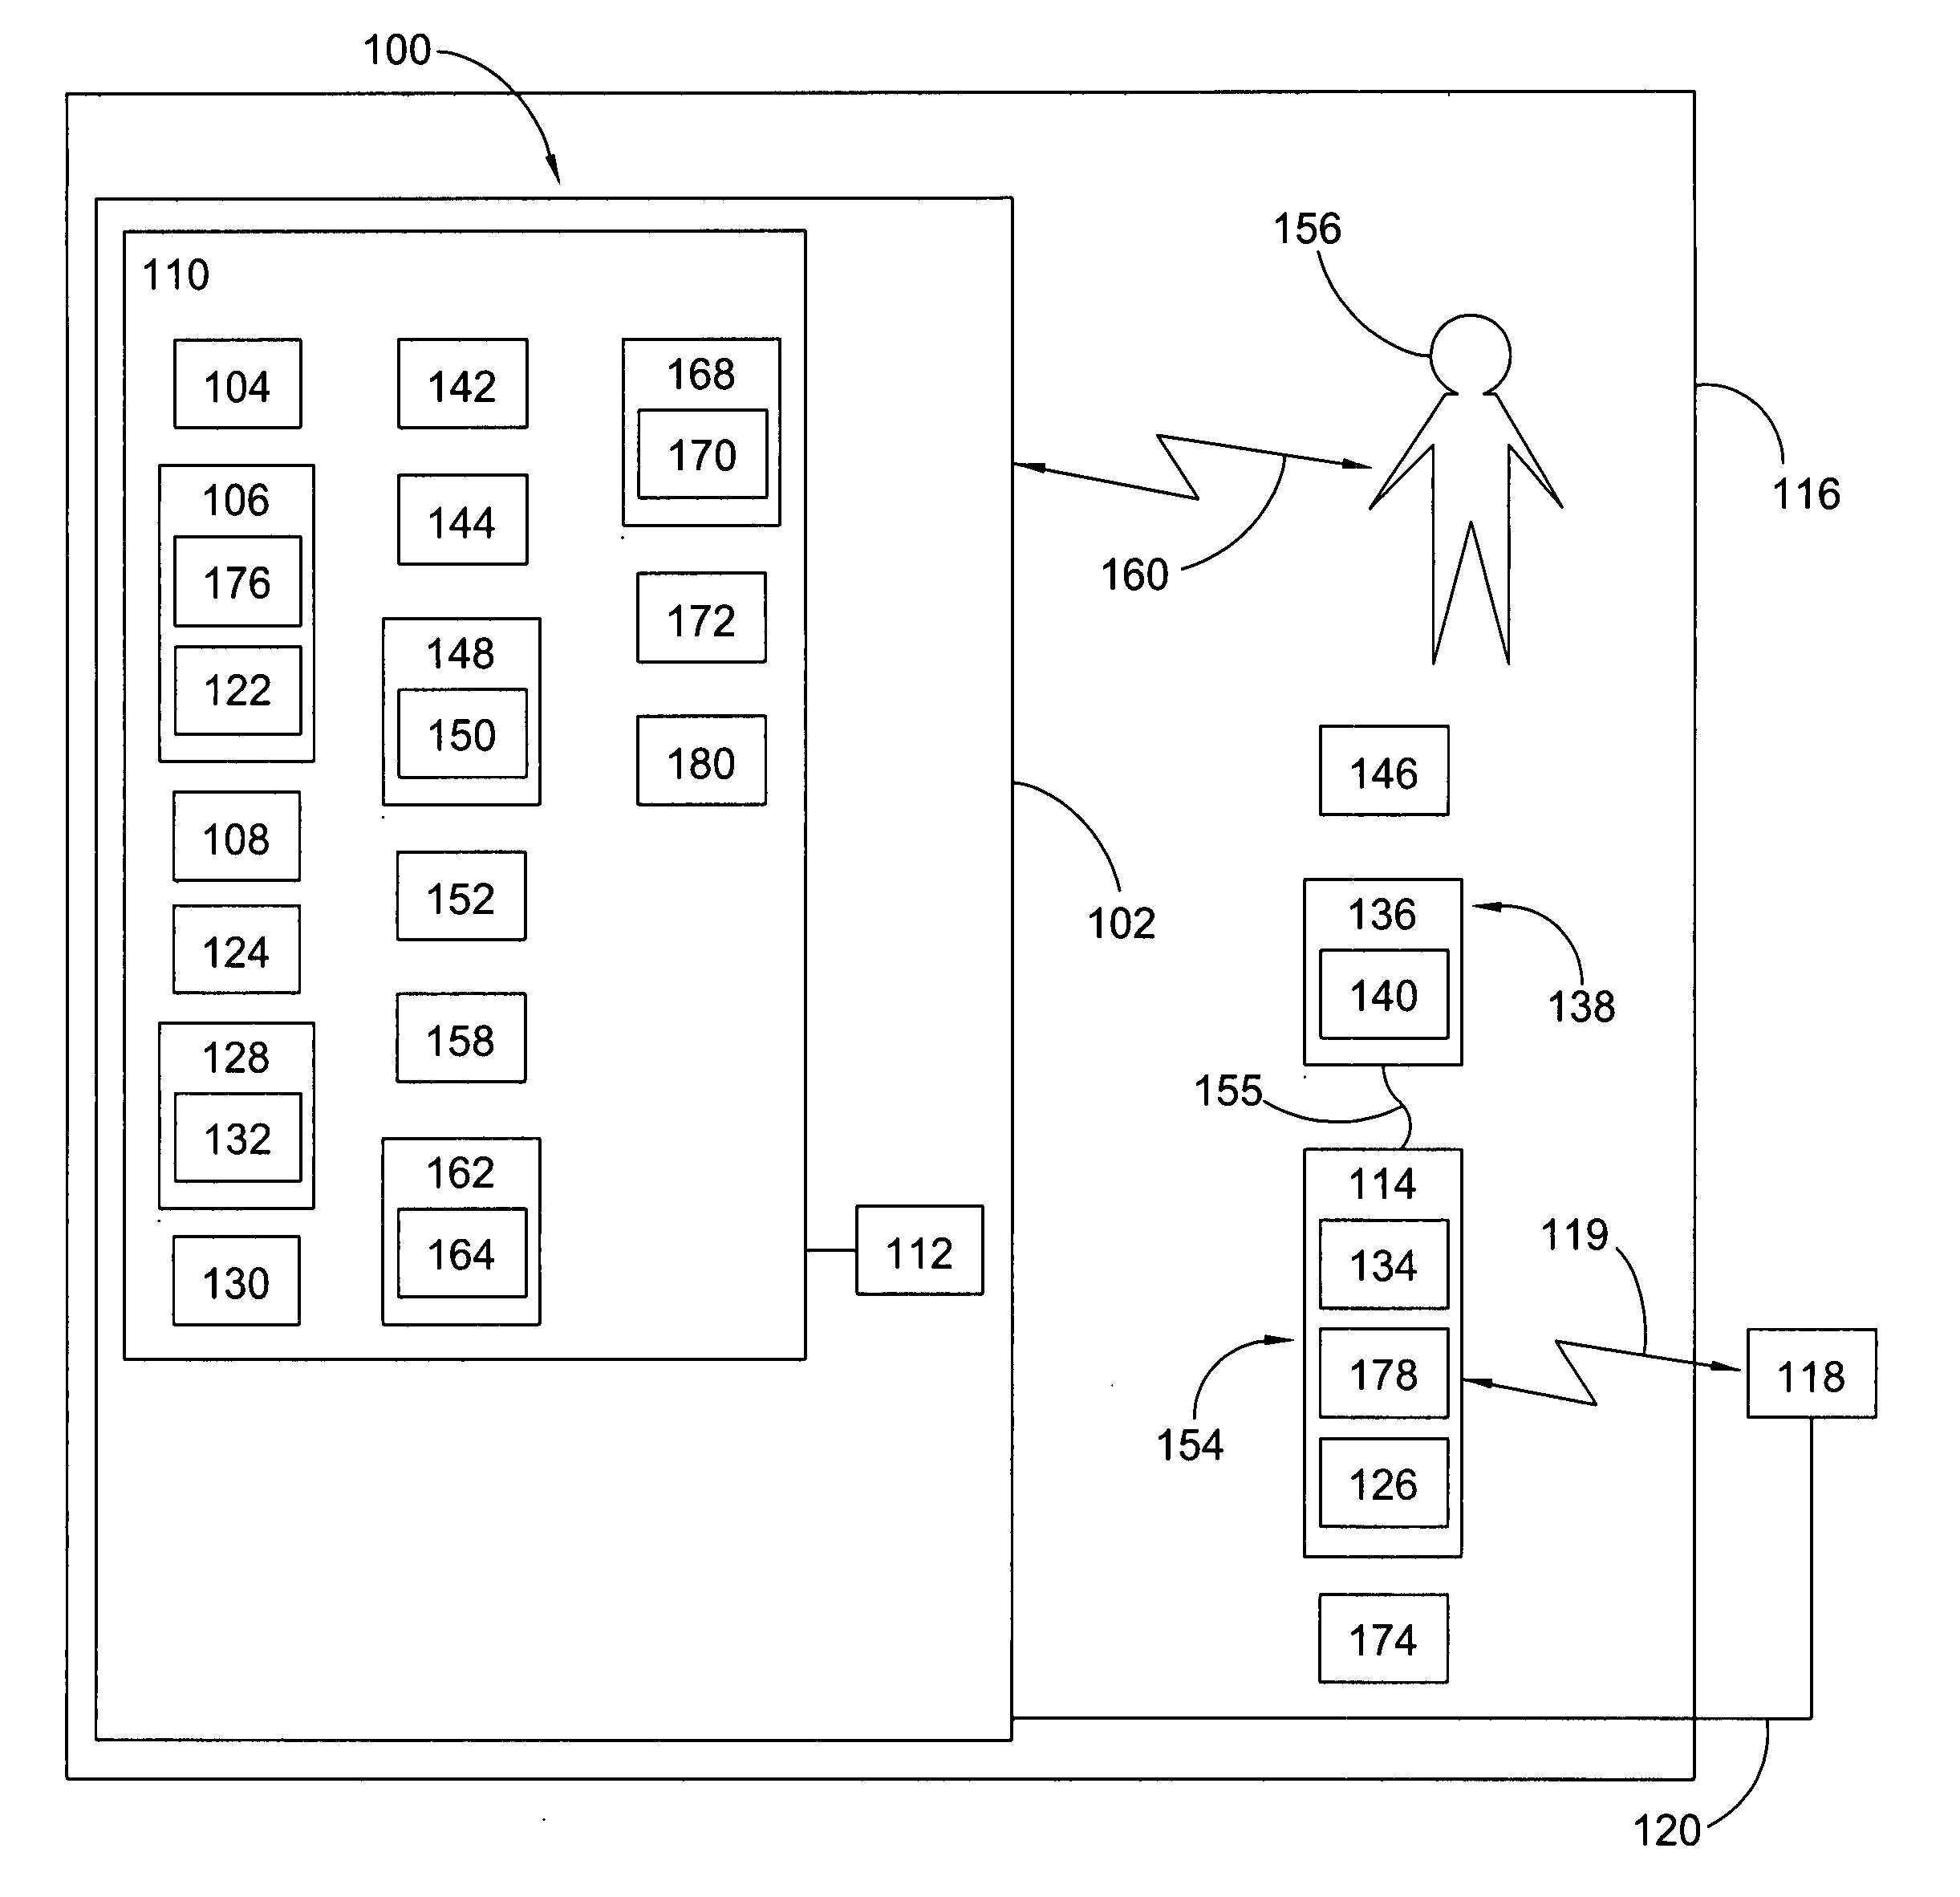 Wireless communications device as in-store assistant